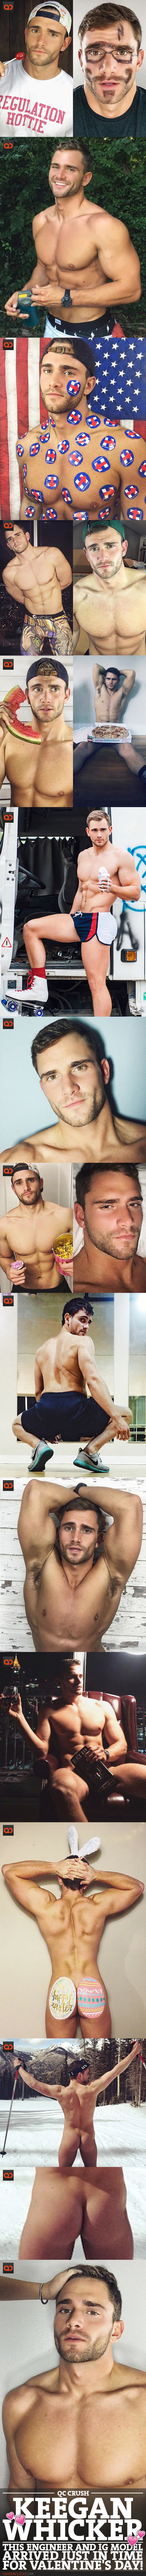 QC Crush: Meet Keegan Whicker - This Engineer And IG Model Arrived Just In Time For Valentine's Day!